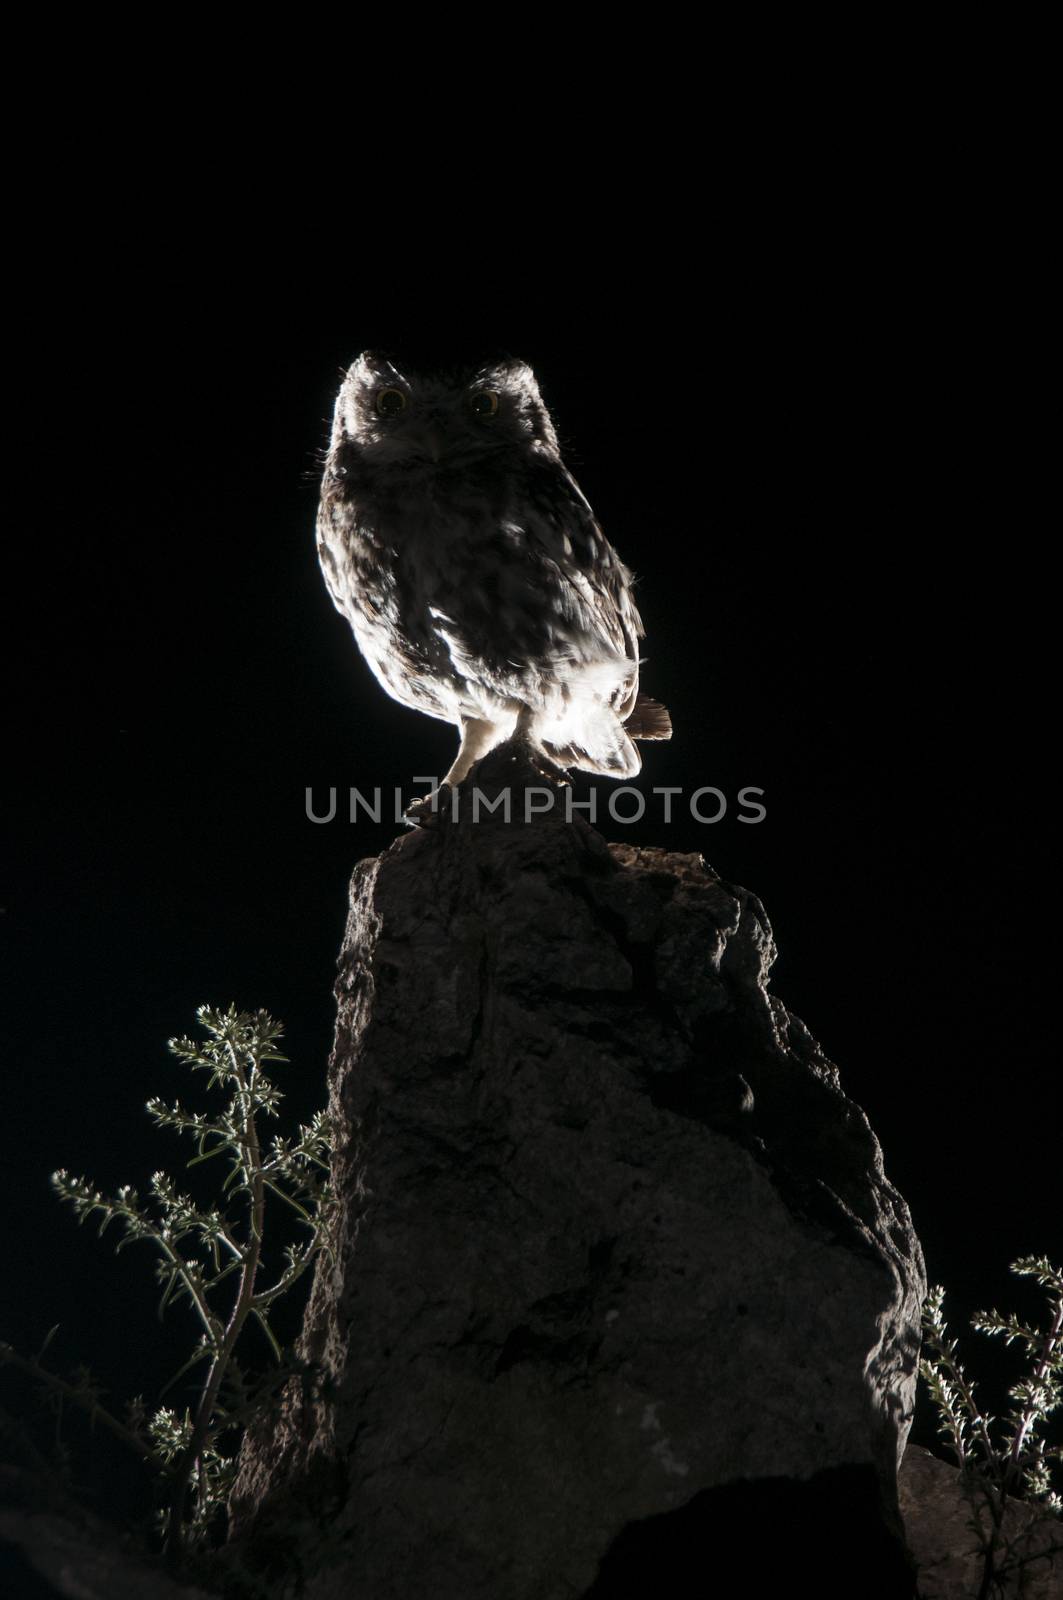 Athene noctua owl, perched on a rock at night, Little Owl  by jalonsohu@gmail.com